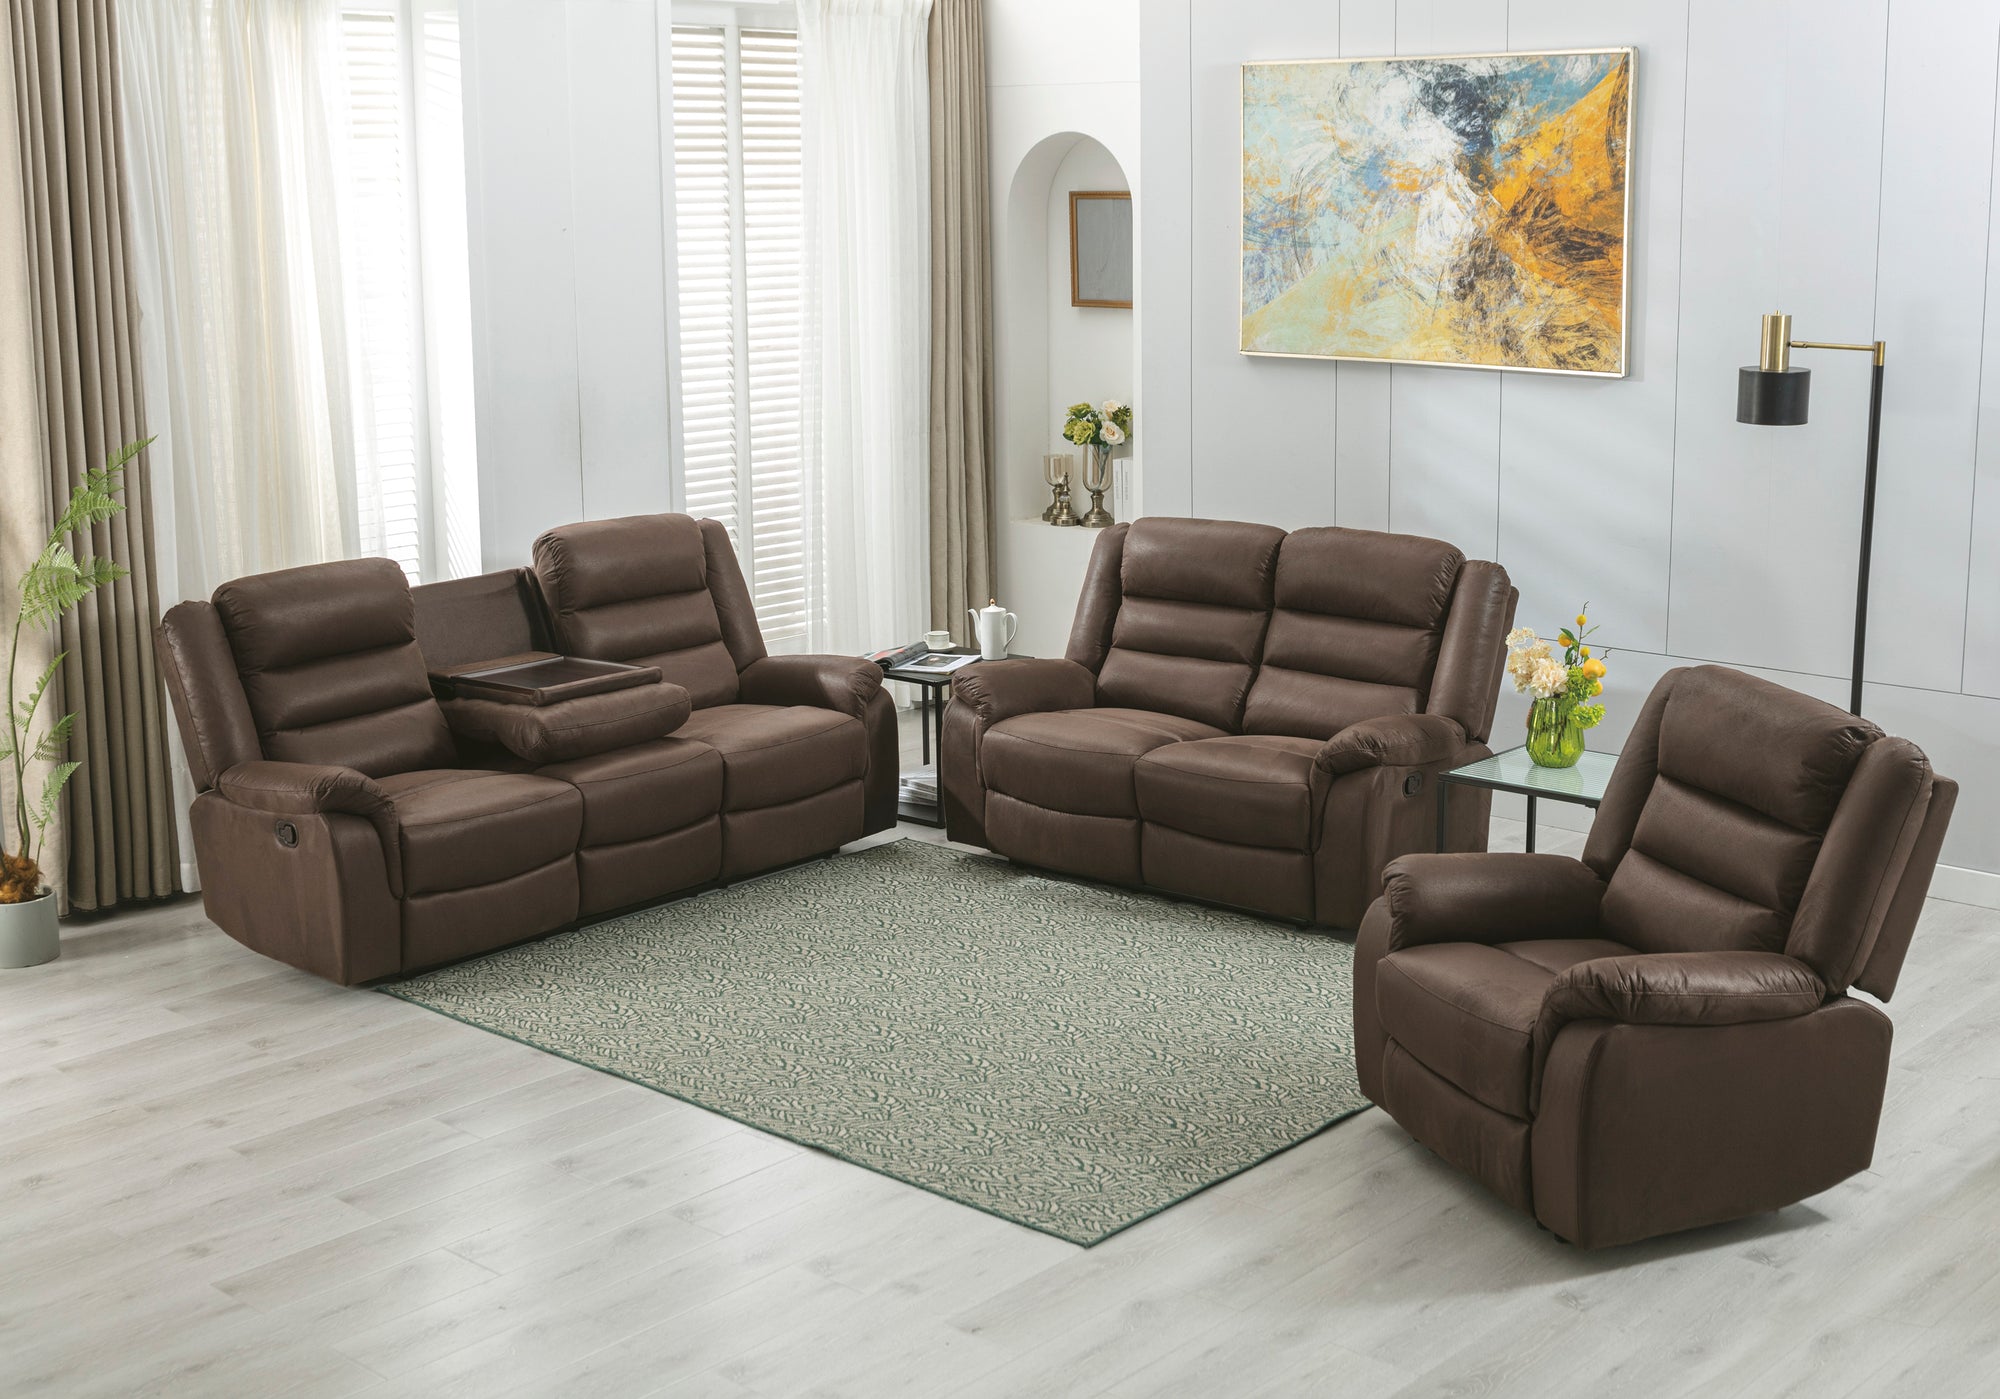 725 FI-A Reclining Sofa with Drop down table and Loveseat